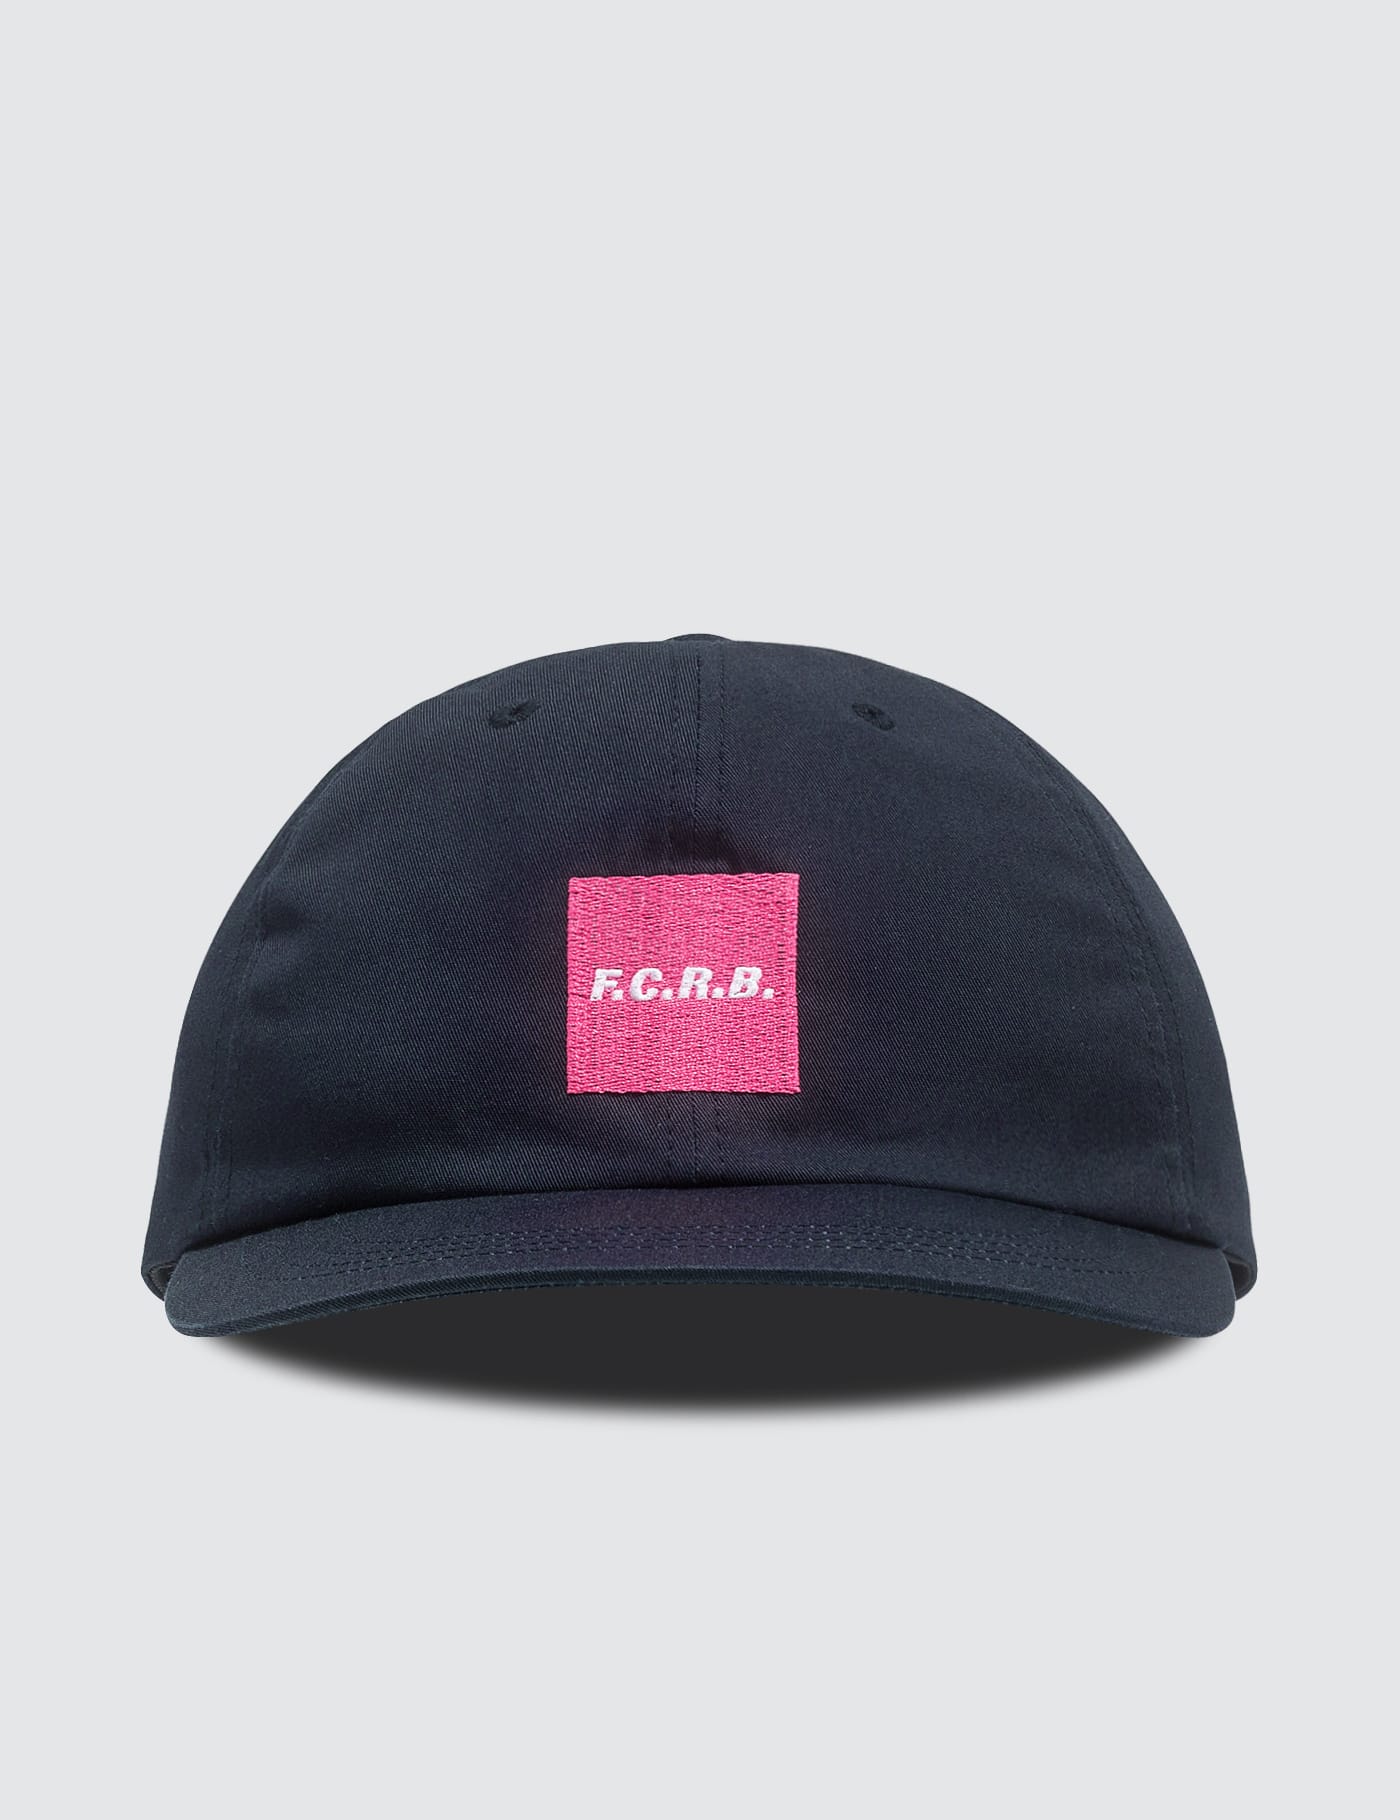 F.C. Real Bristol - Square F.C.R.B. Cap | HBX - Globally Curated 